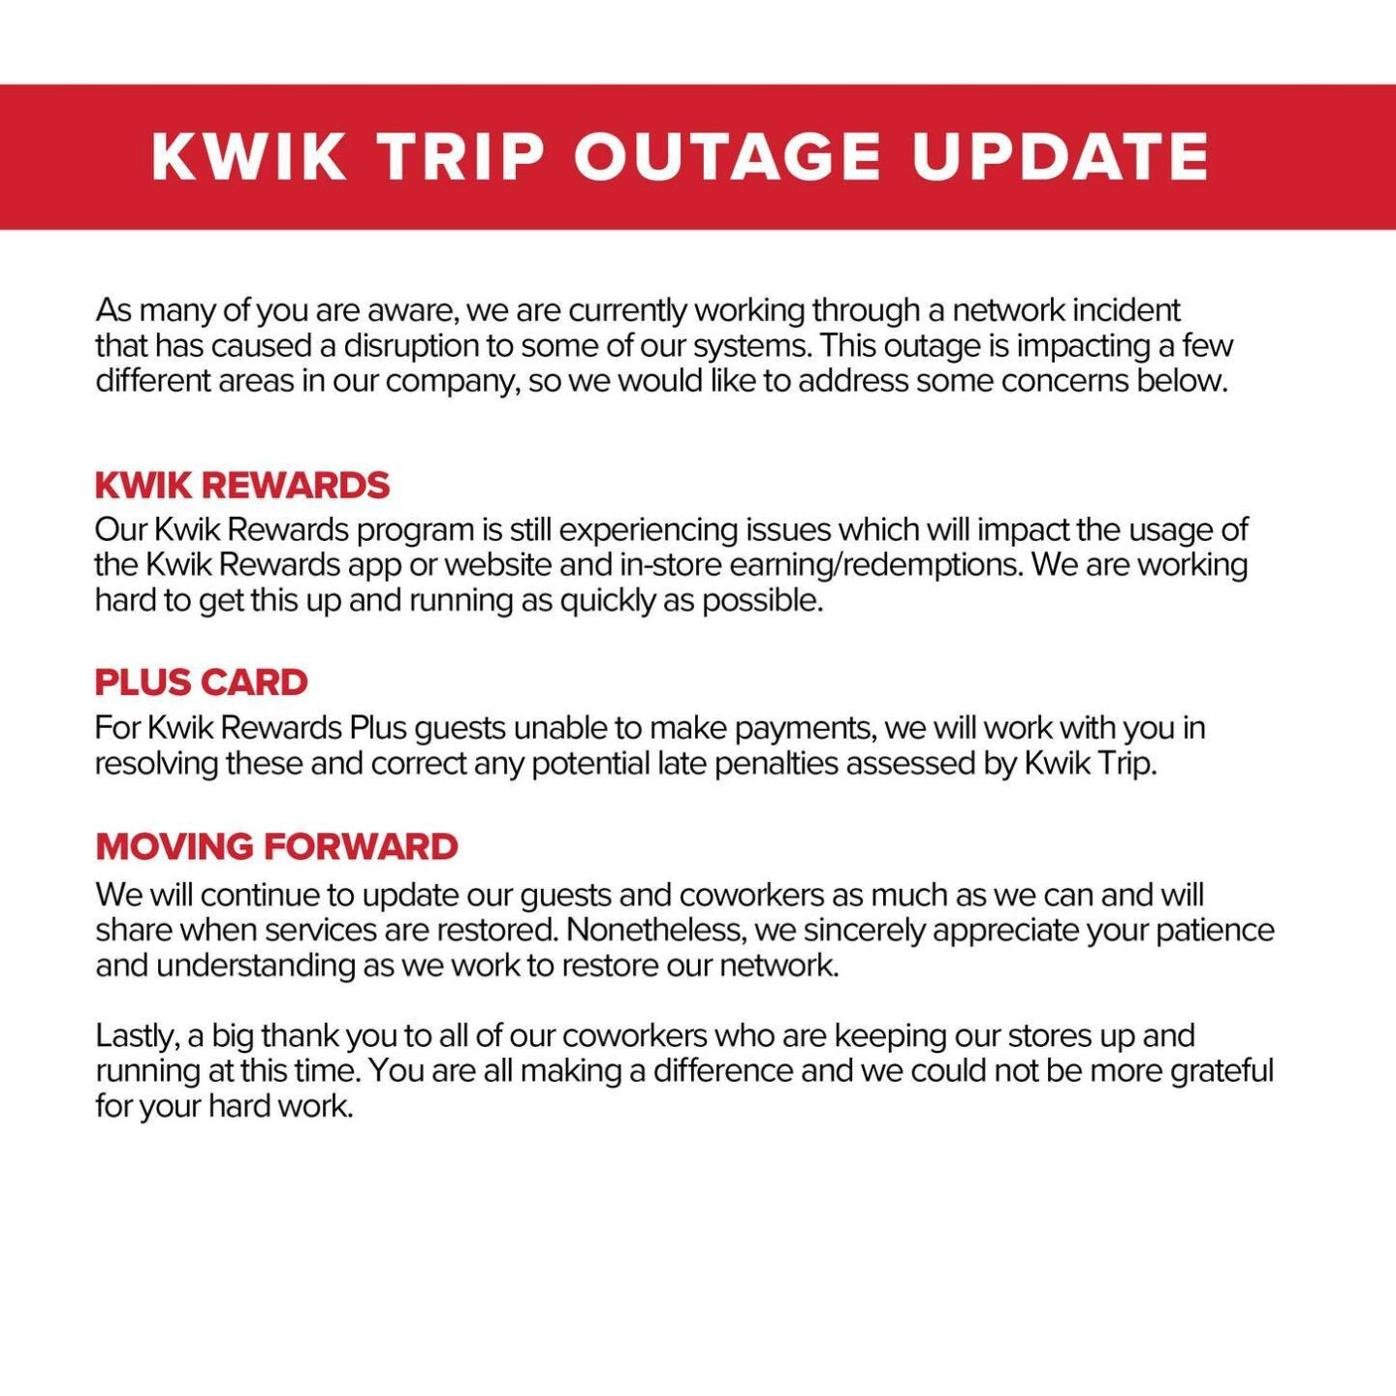 Kwik Trip system disrupted by incident, spokesperson says